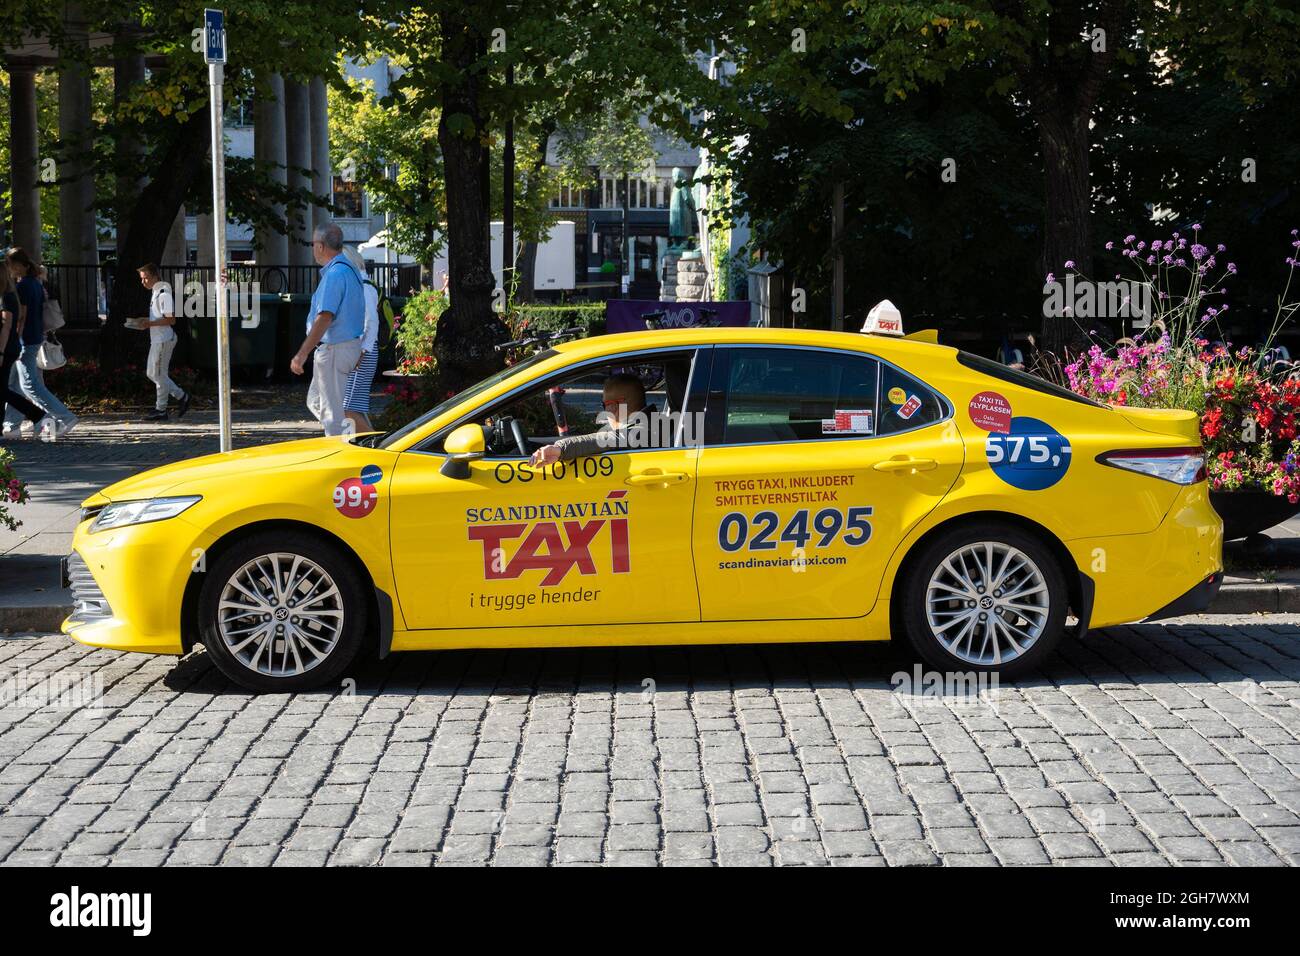 Taxi in Oslo, Norway Stock Photo - Alamy